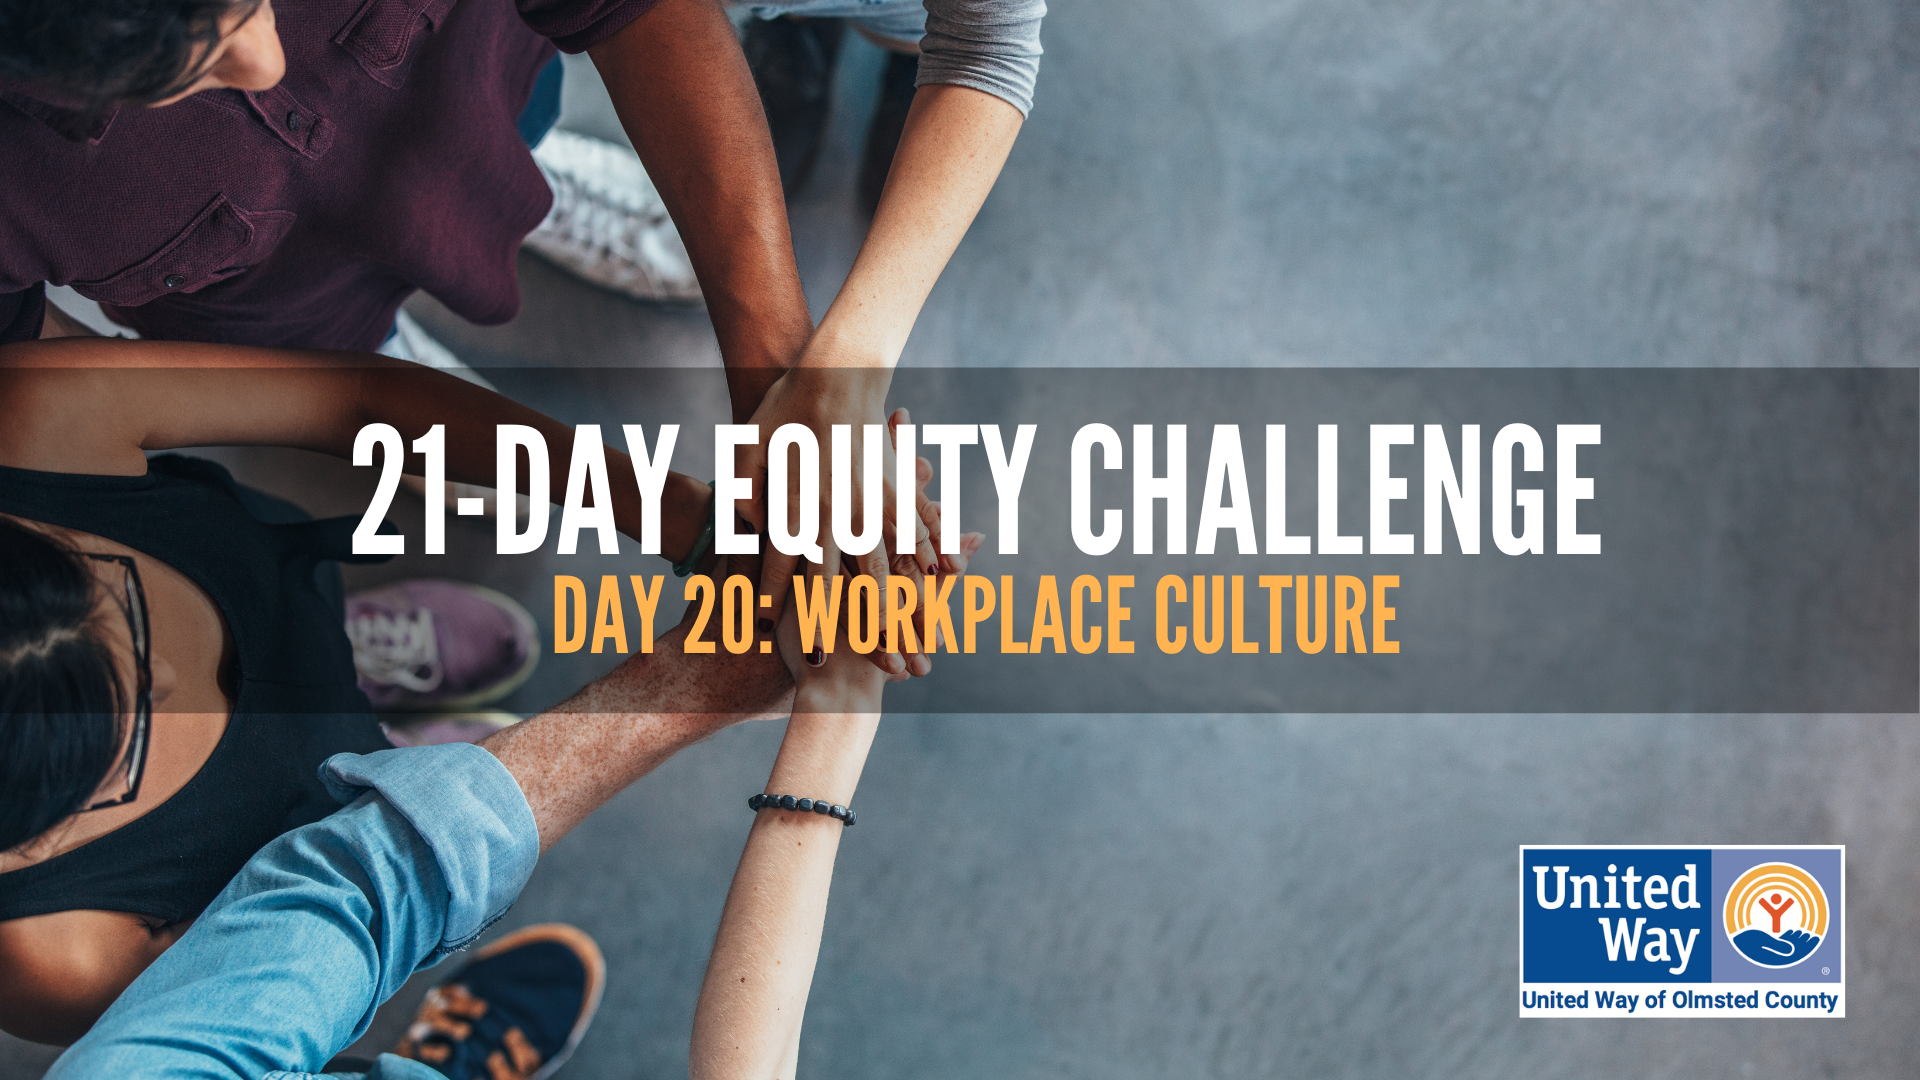 Day 20: Workplace Culture